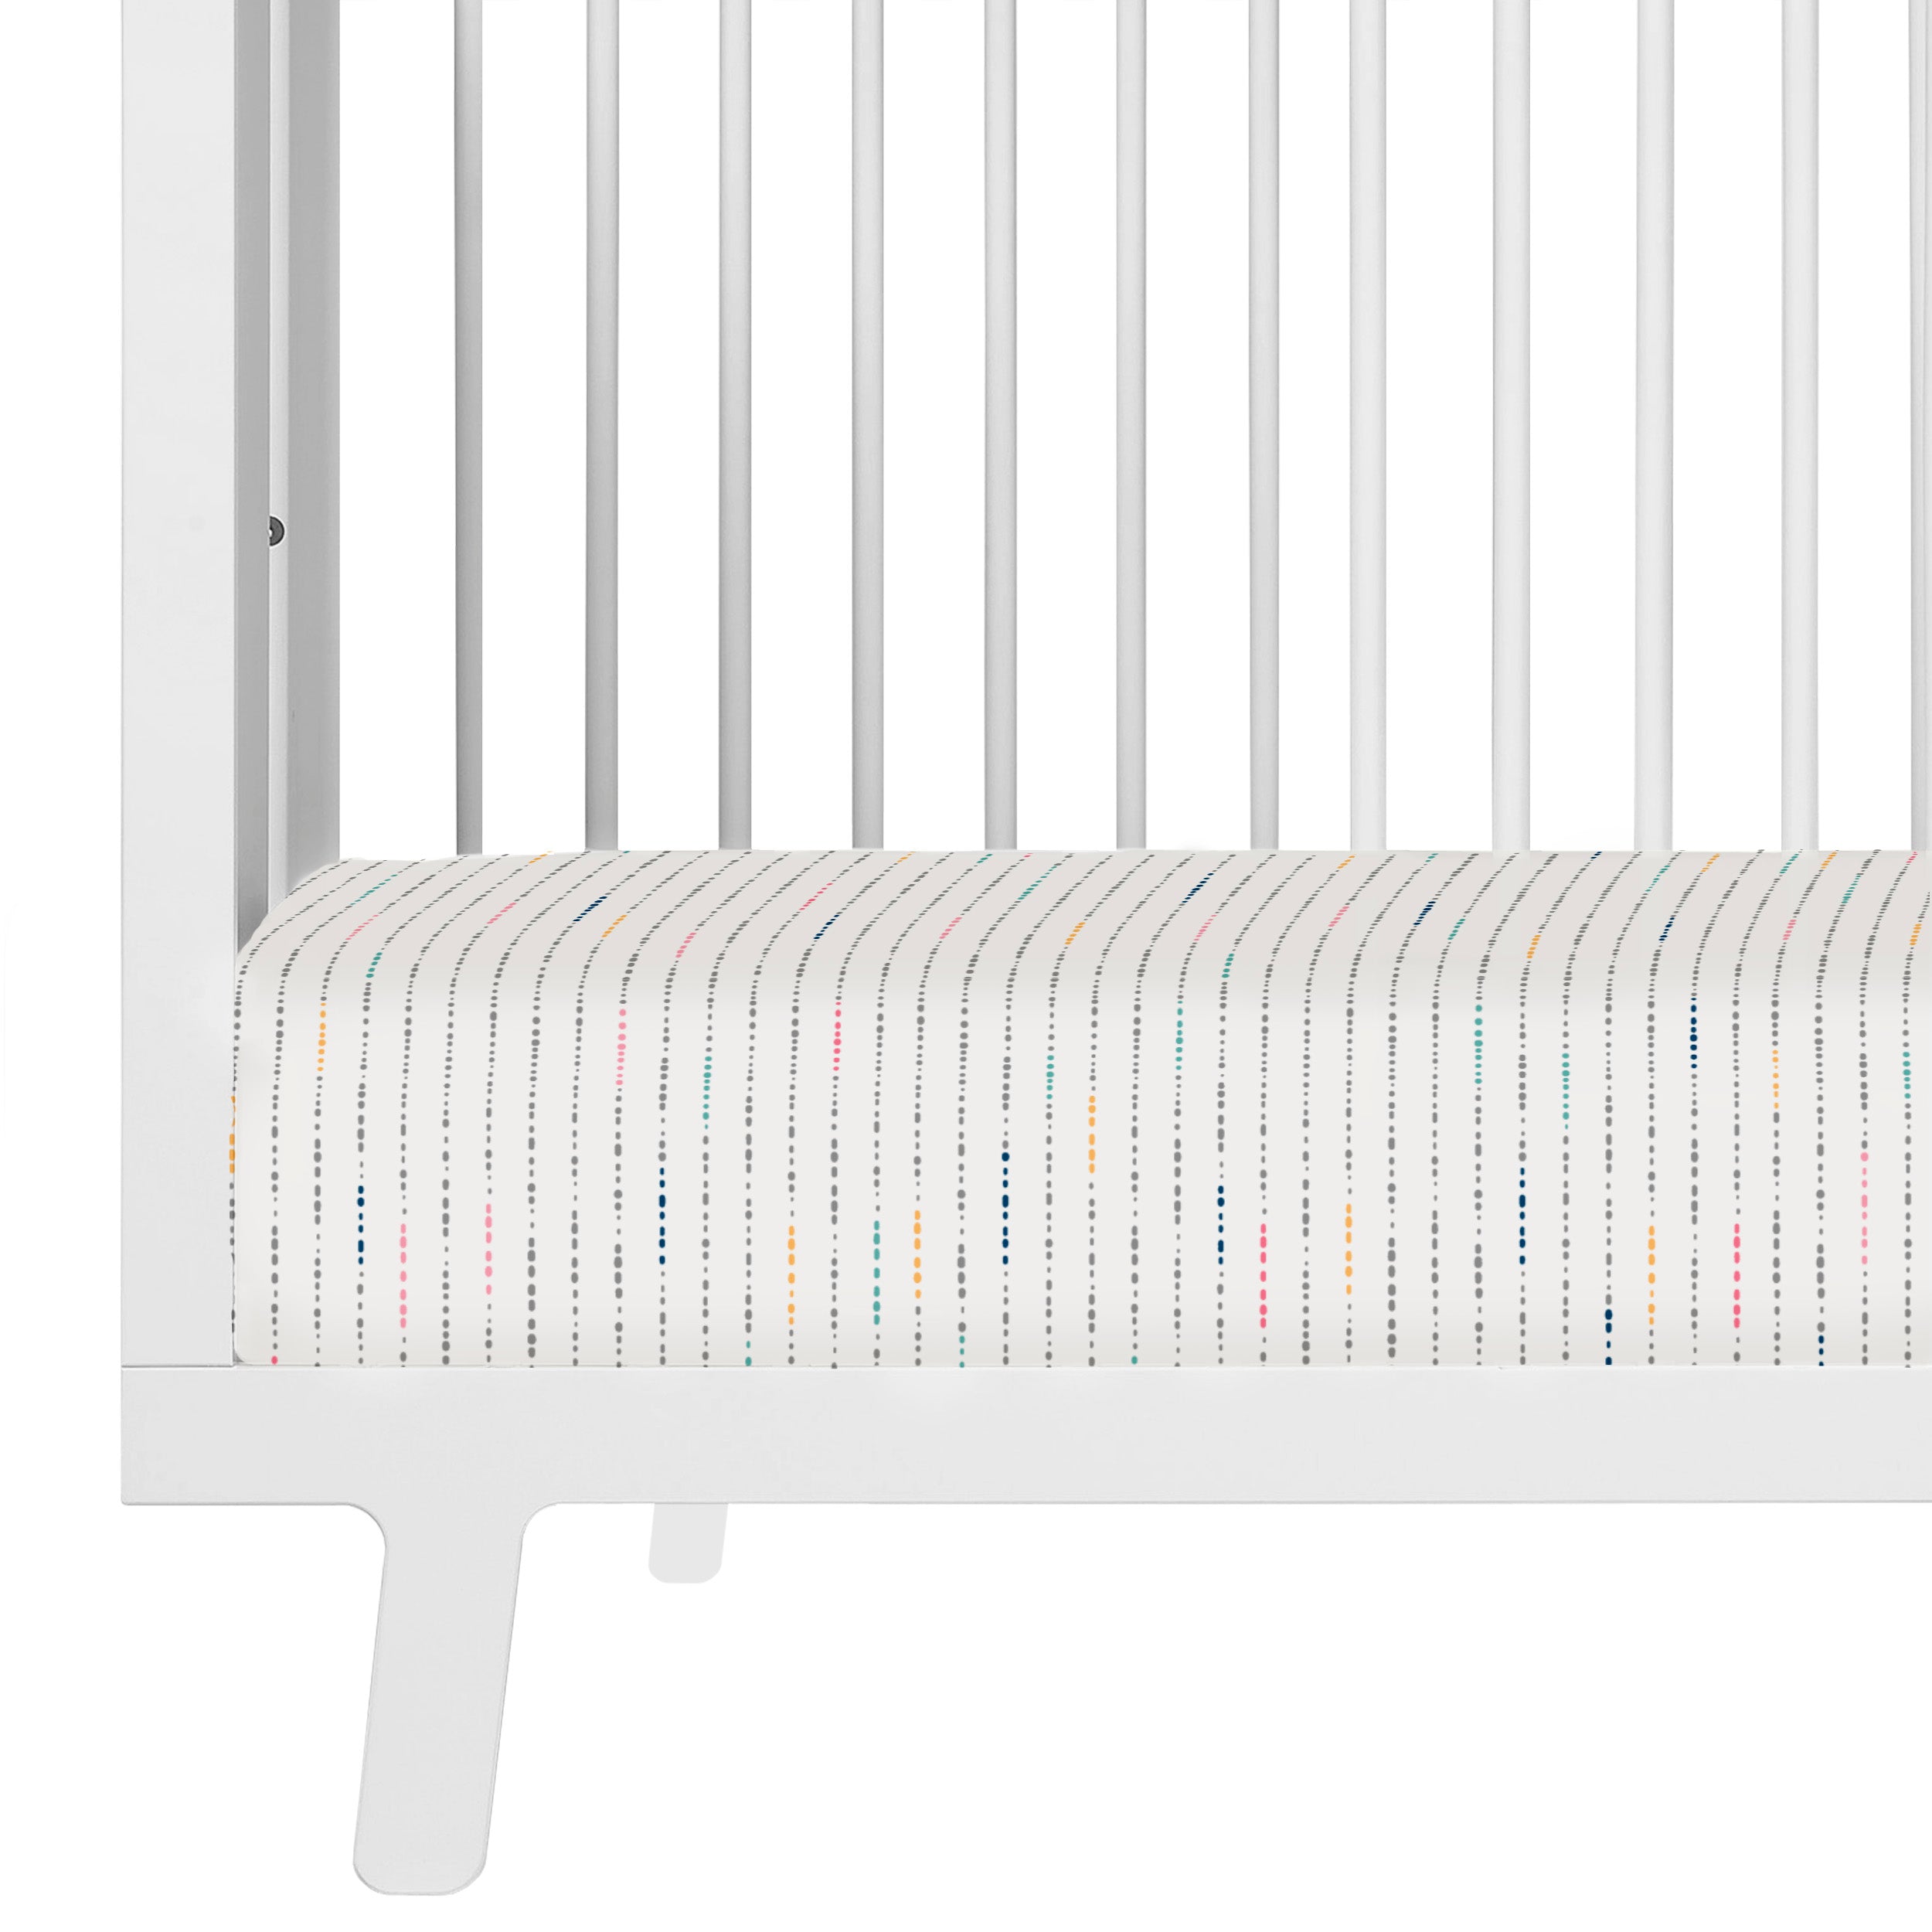 Close-up view of a white Makemake Organics crib with a dotted mattress, showing clean, sleek lines and a minimalist design.